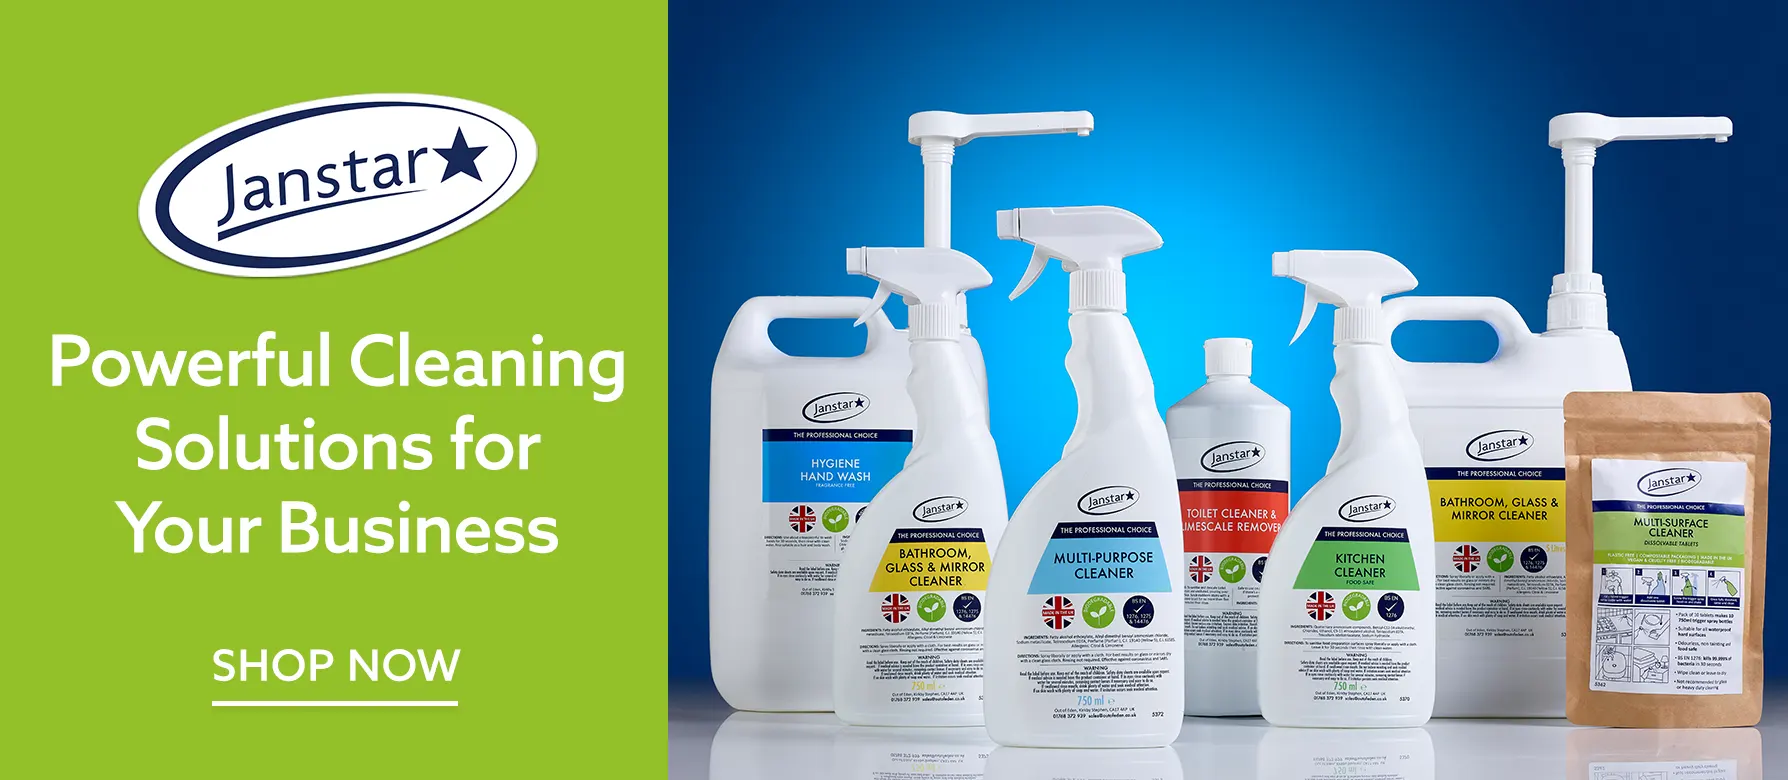 Janstar Professional Cleaning - Hotel Supplies